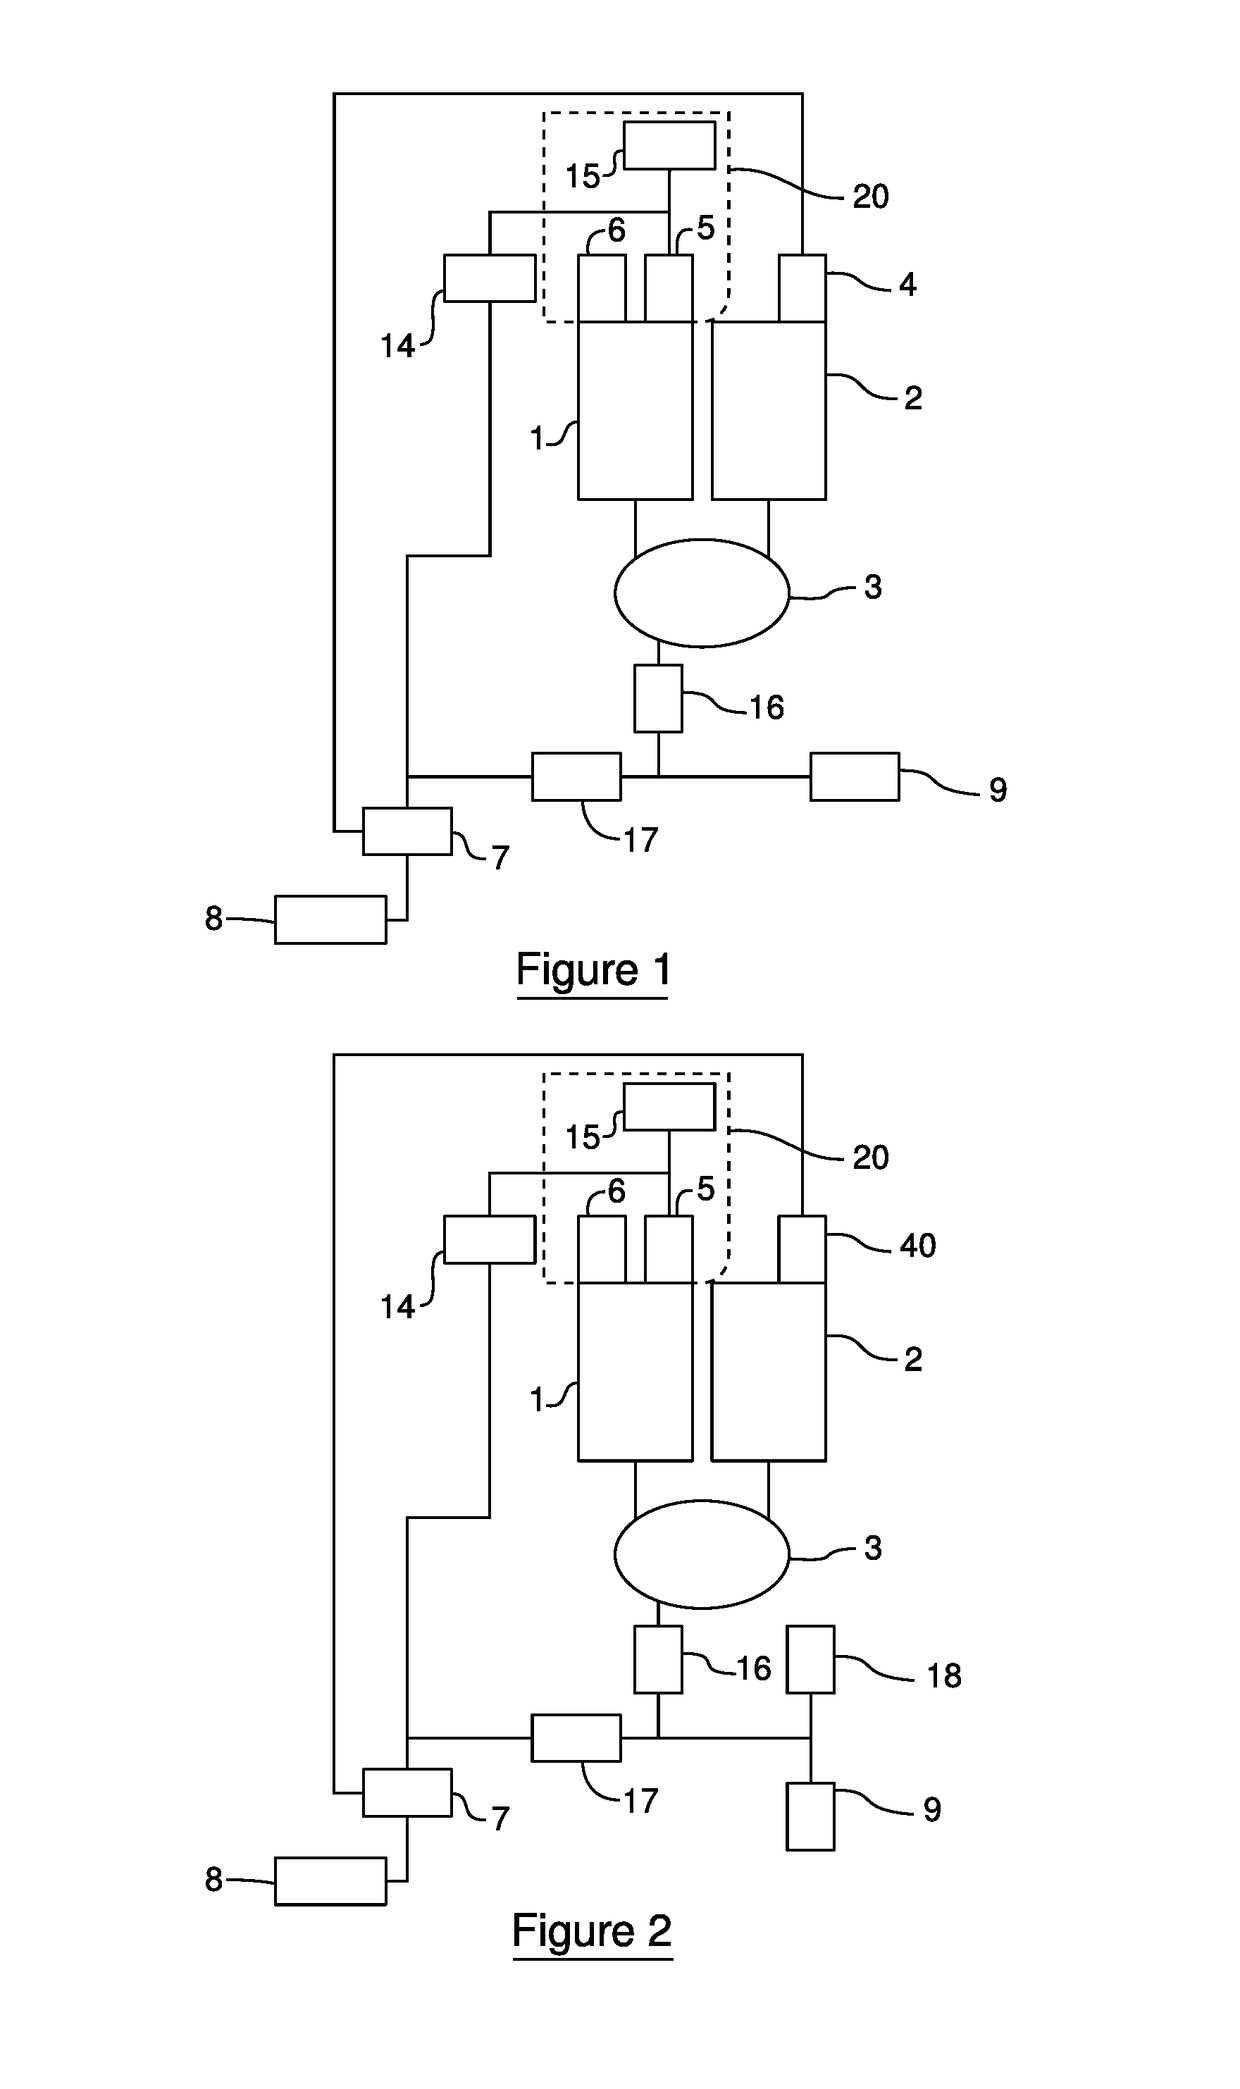 Architecture of a multi-engine helicopter propulsion system and corresponding helicopter